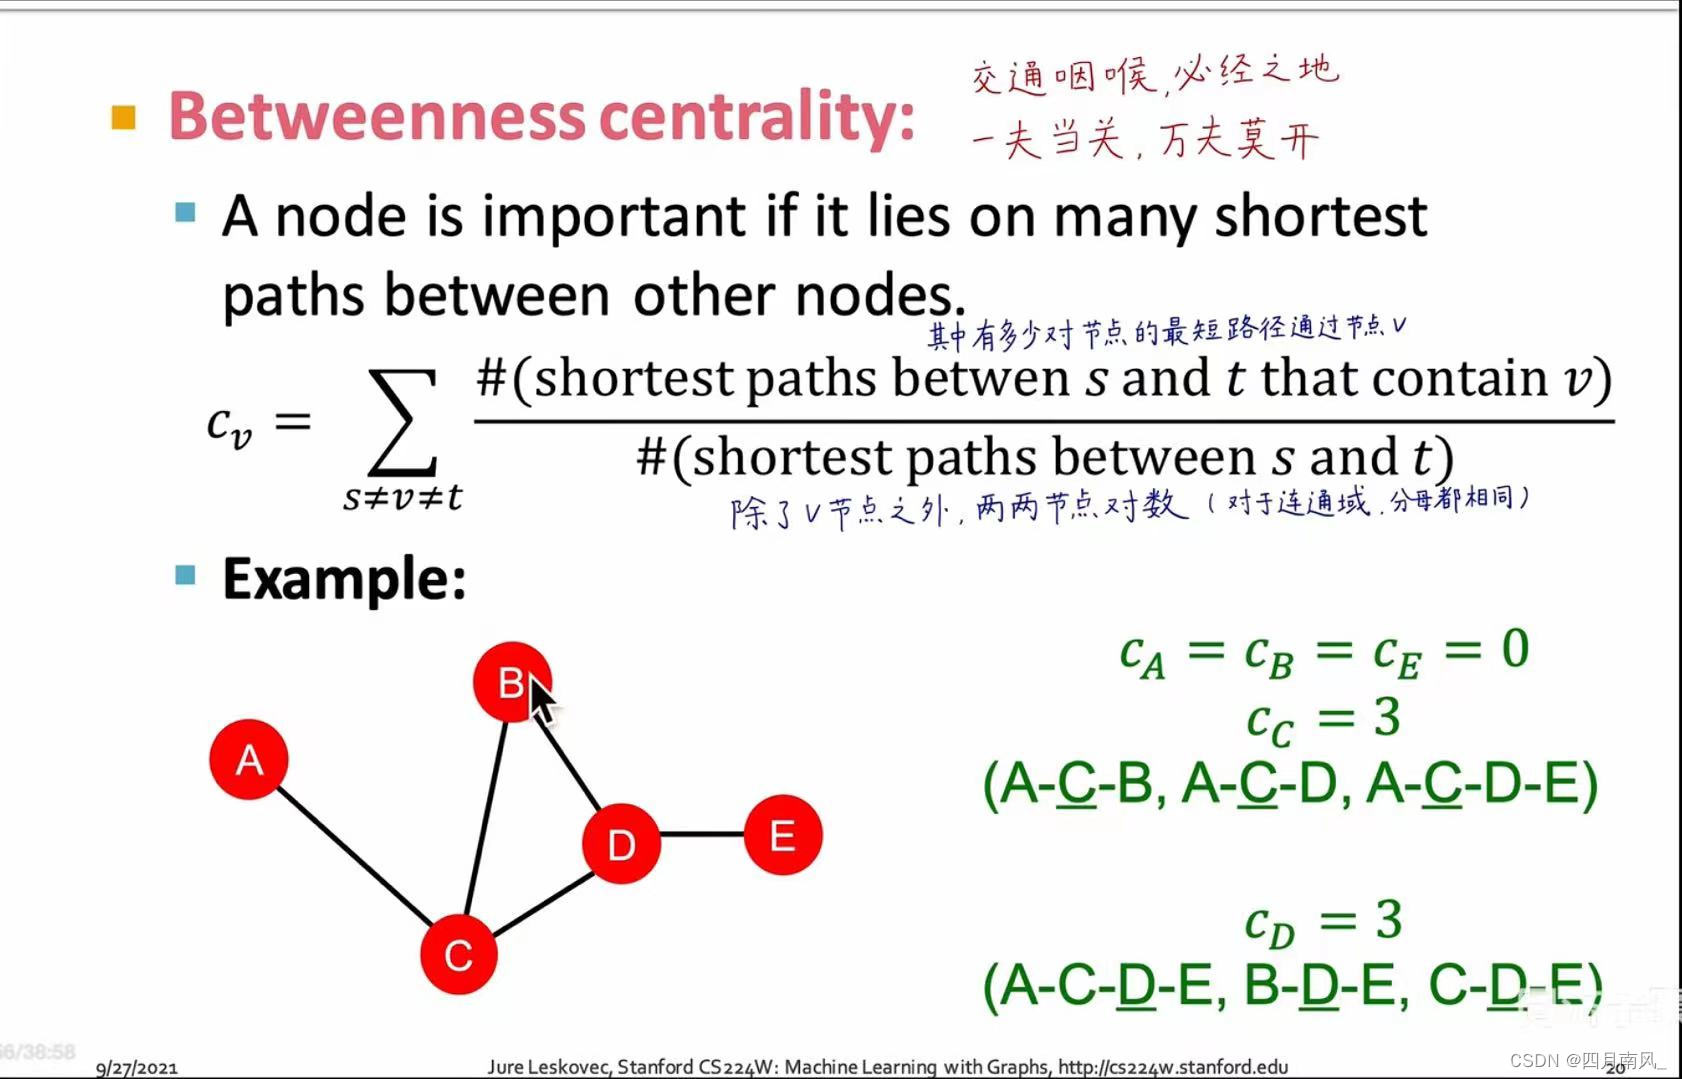 Betweenness centrality